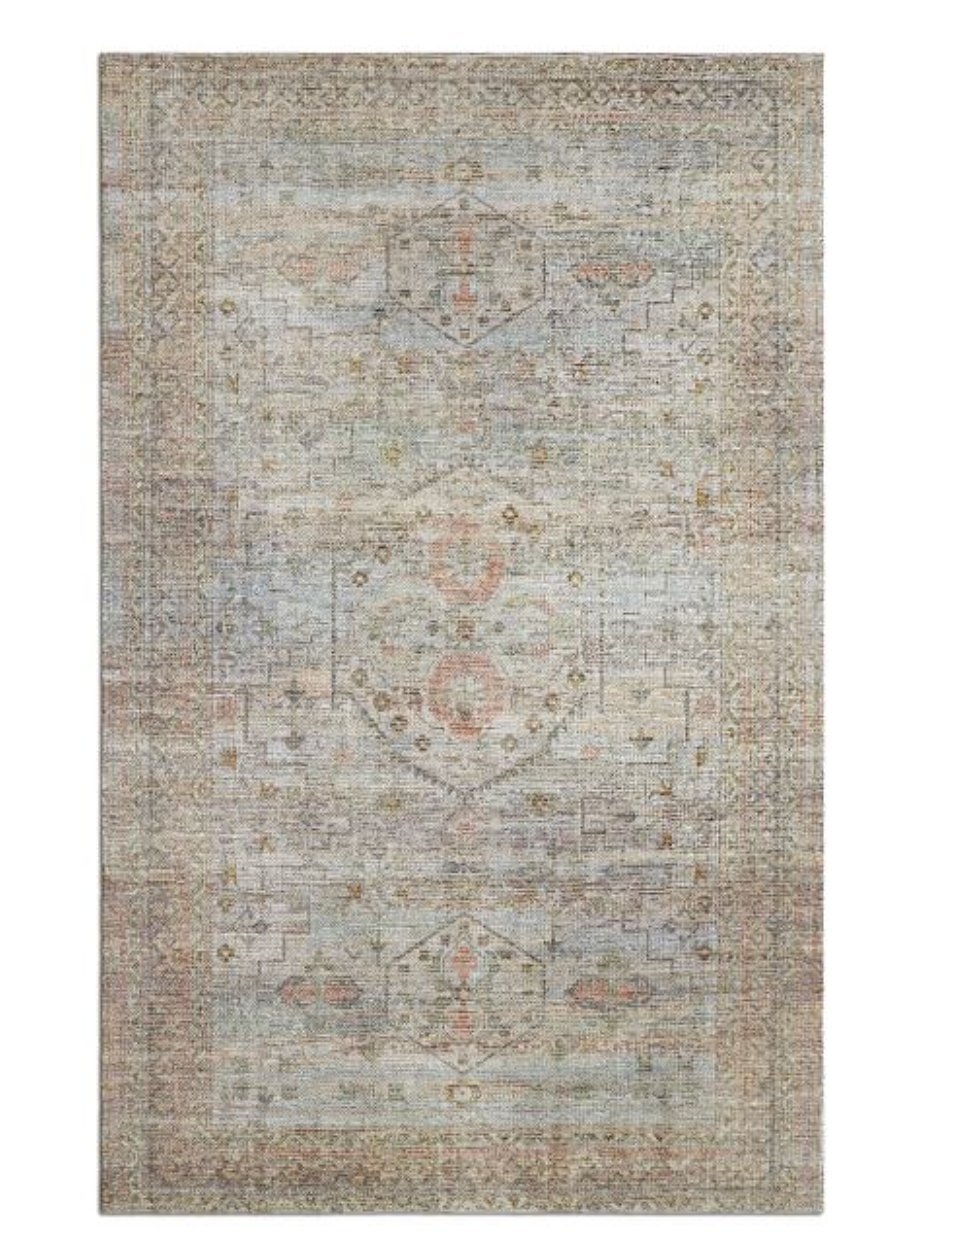 Lorre Handwoven Jute Chenille Rug, 6' x 9', Cool Multi - Image 0